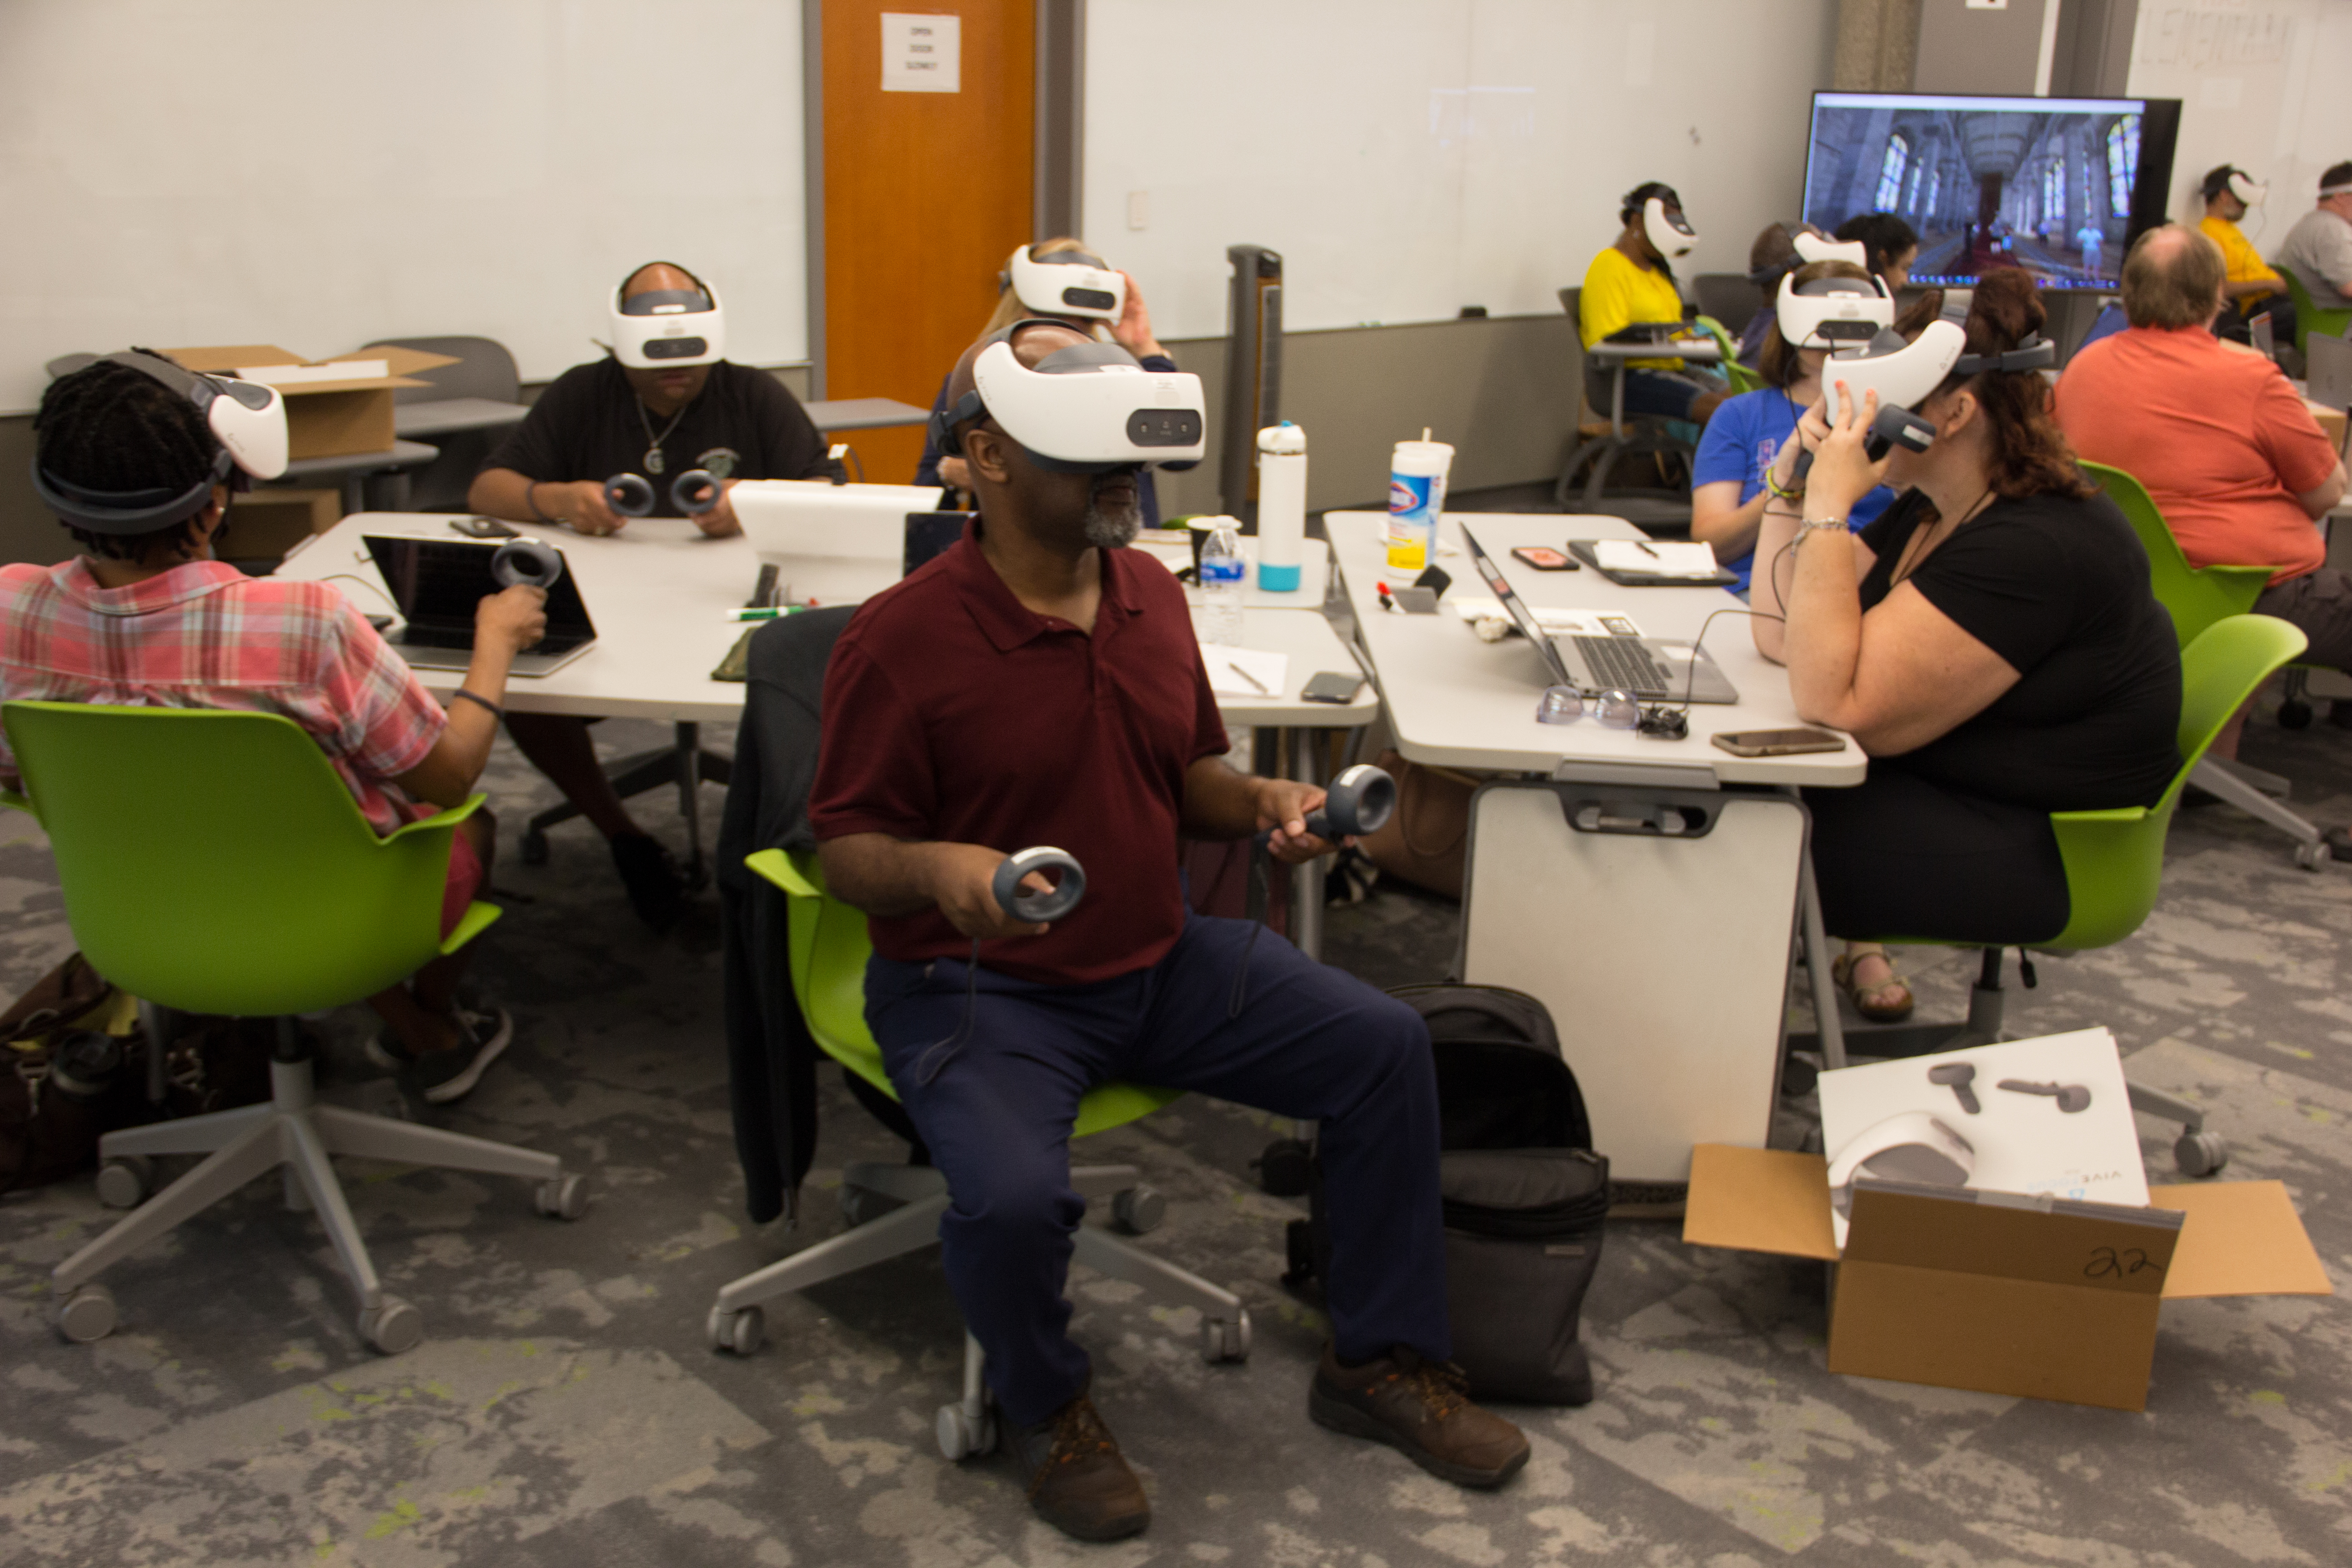 TILL staff members examining the newly acquired VR headsets.